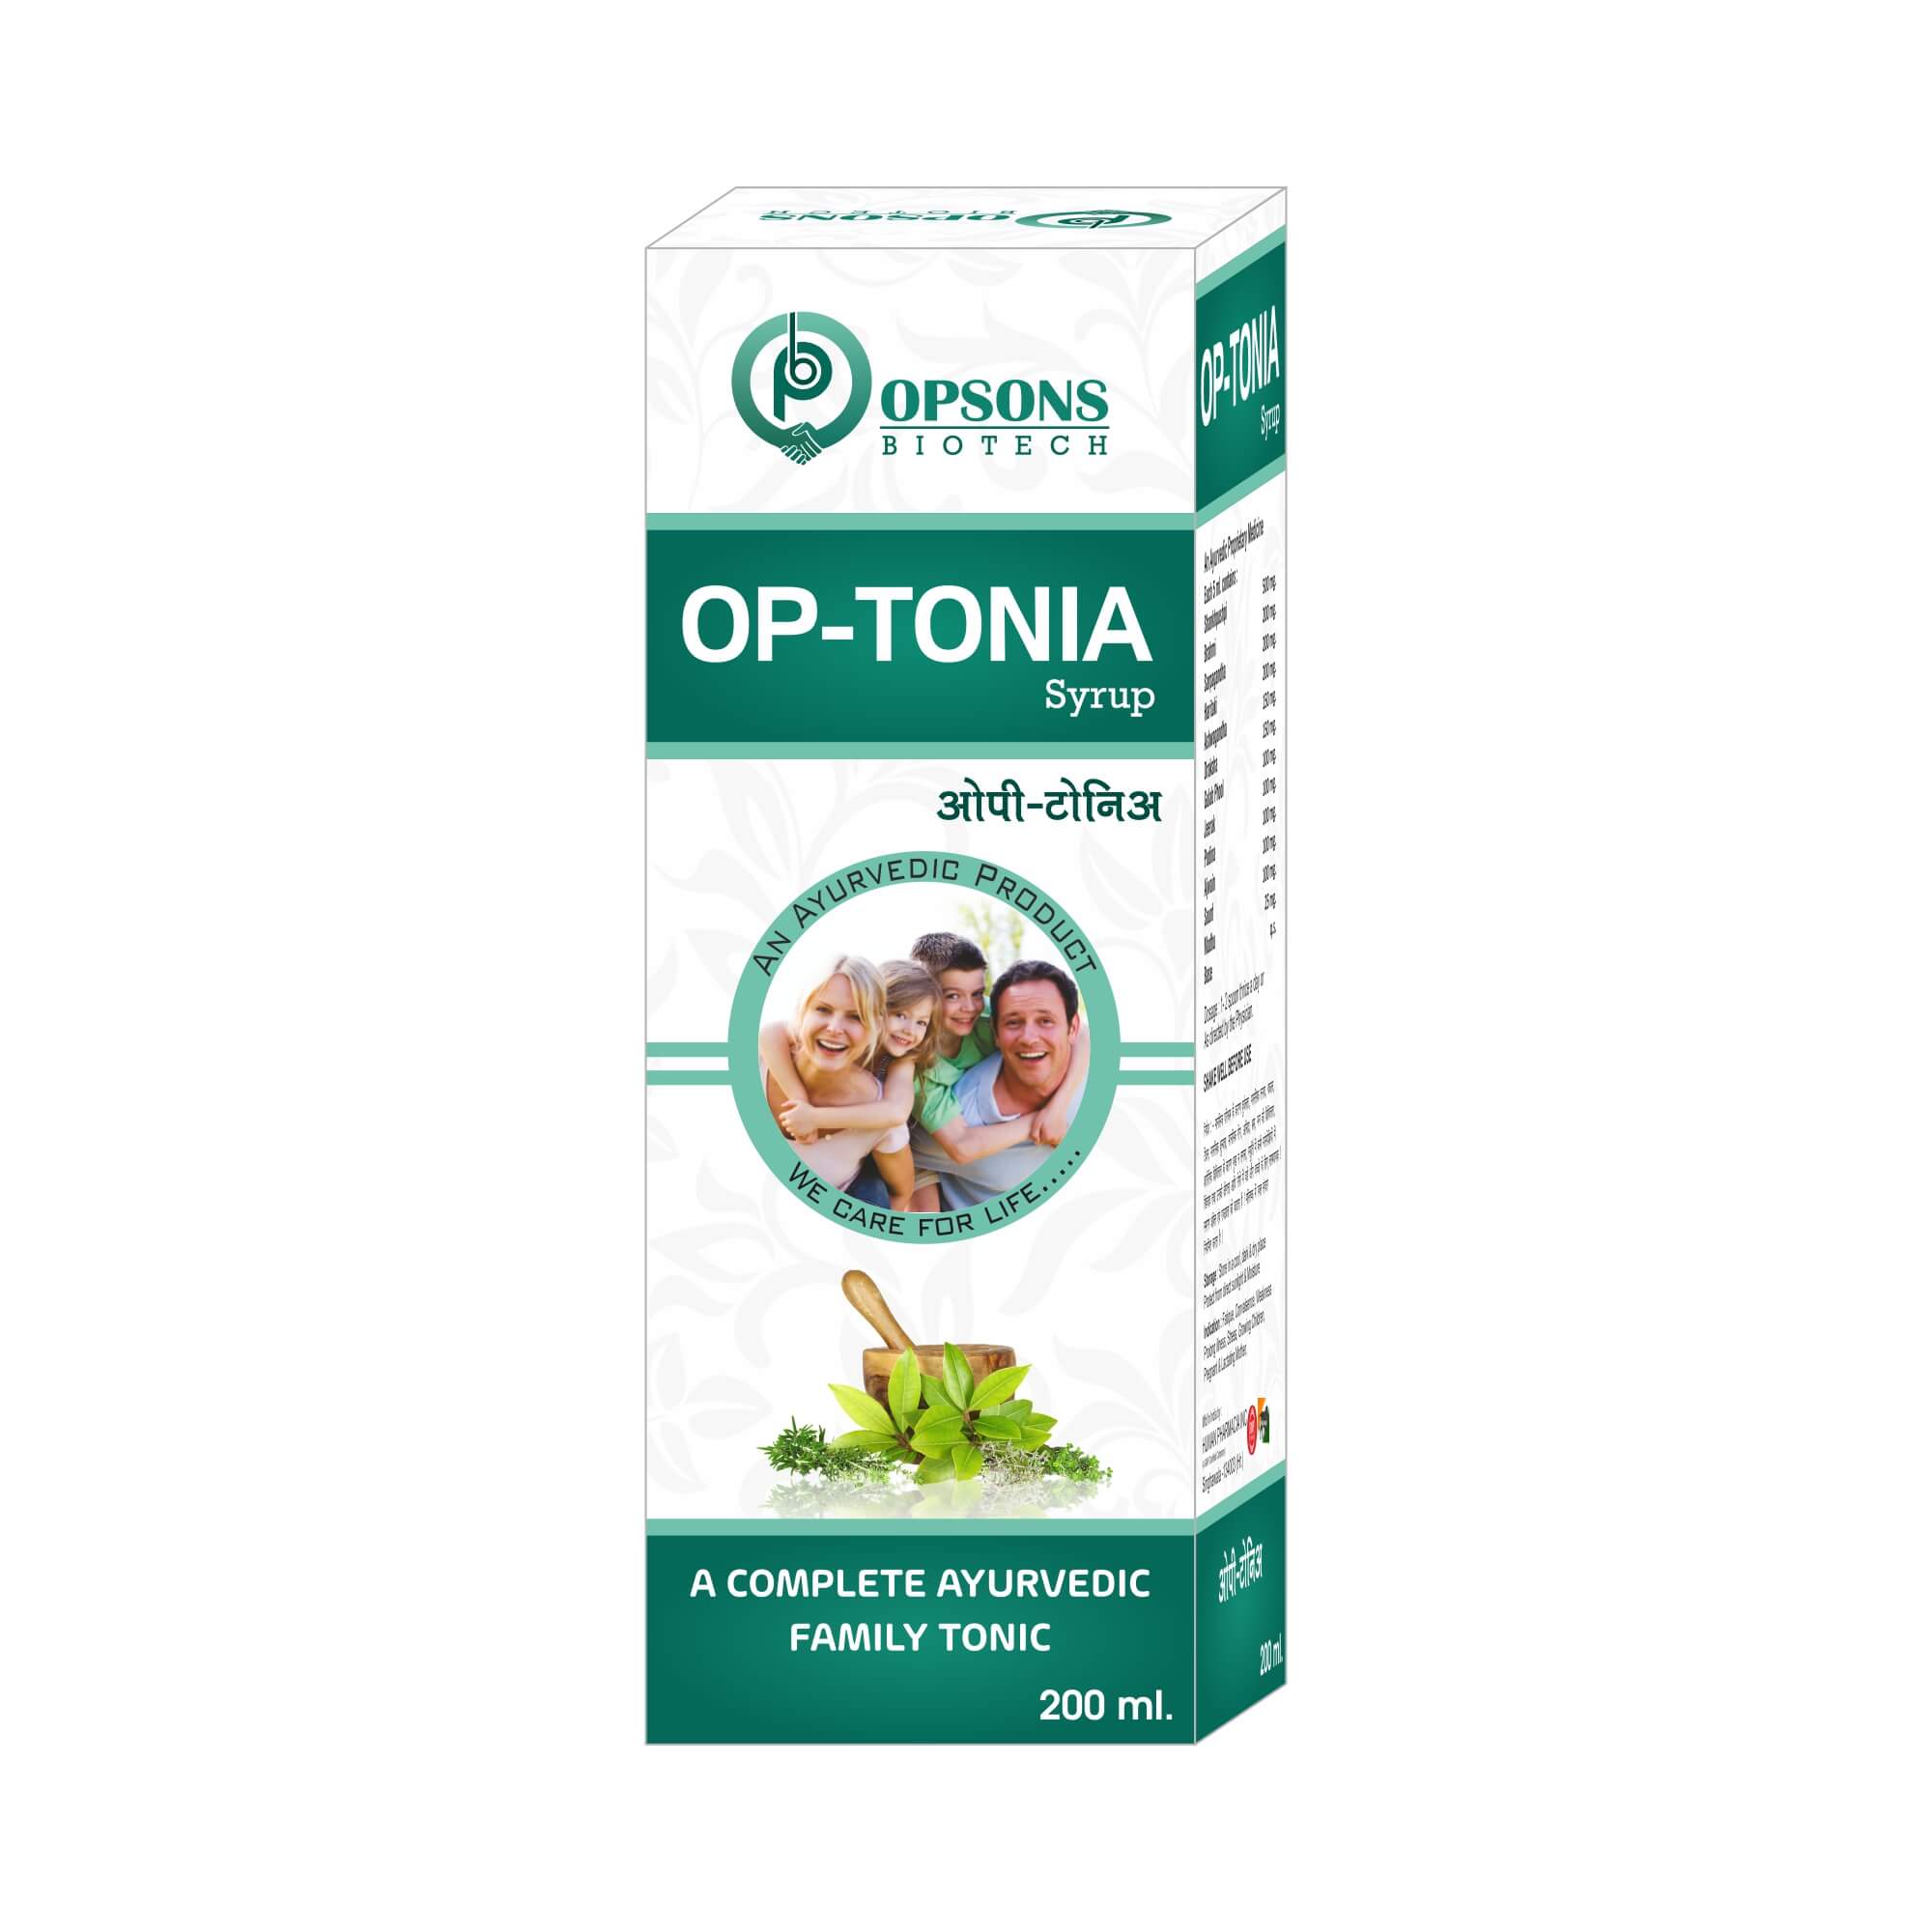 Product Name: OP TONIA, Compositions of OP TONIA are Acomplete Ayurvedic Family Tonic  - Opsons Biotech